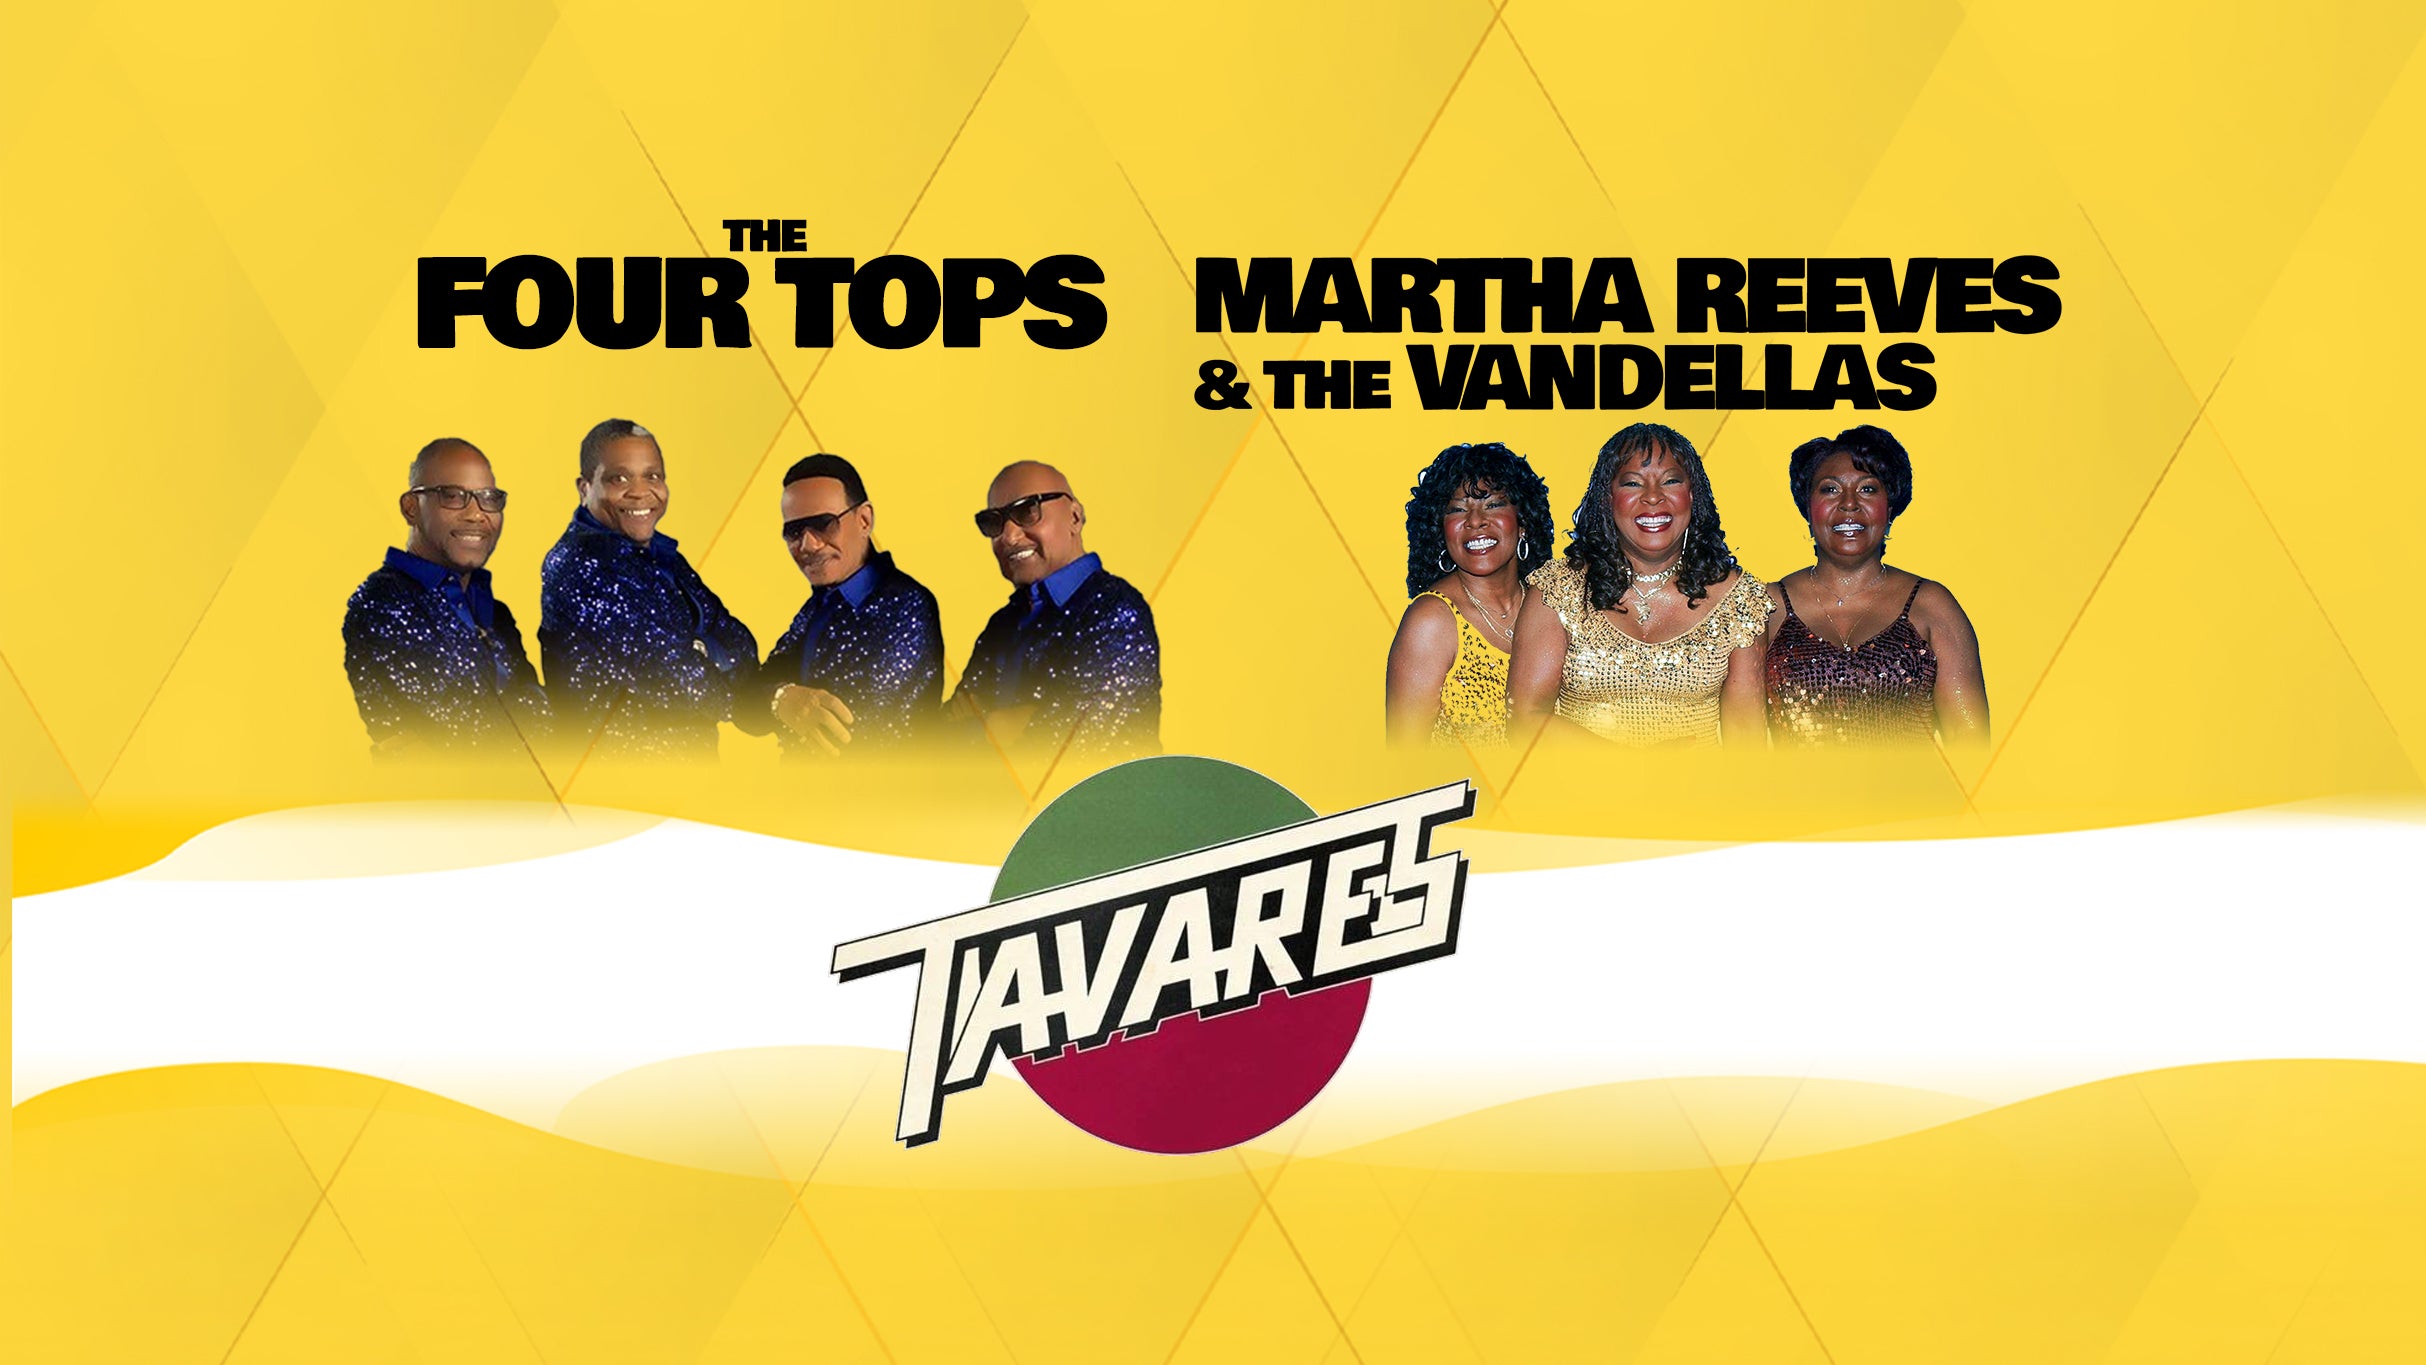 The Four Tops/ Tavares /Martha Reeves & the Vandellas in Liverpool promo photo for Ticketmaster presale offer code